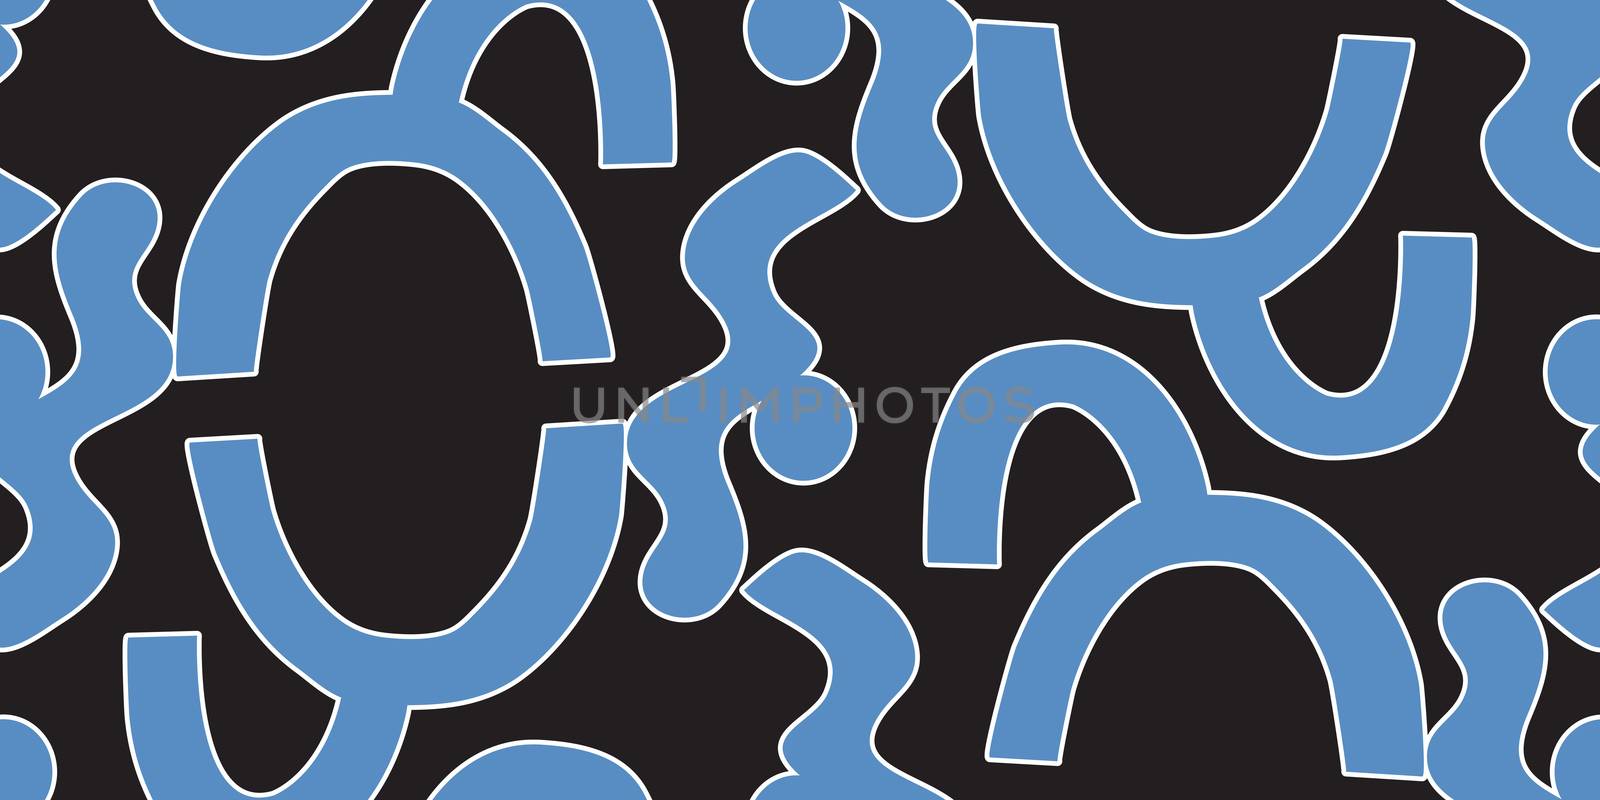 Abstract blue arch shapes over black in repeating pattern